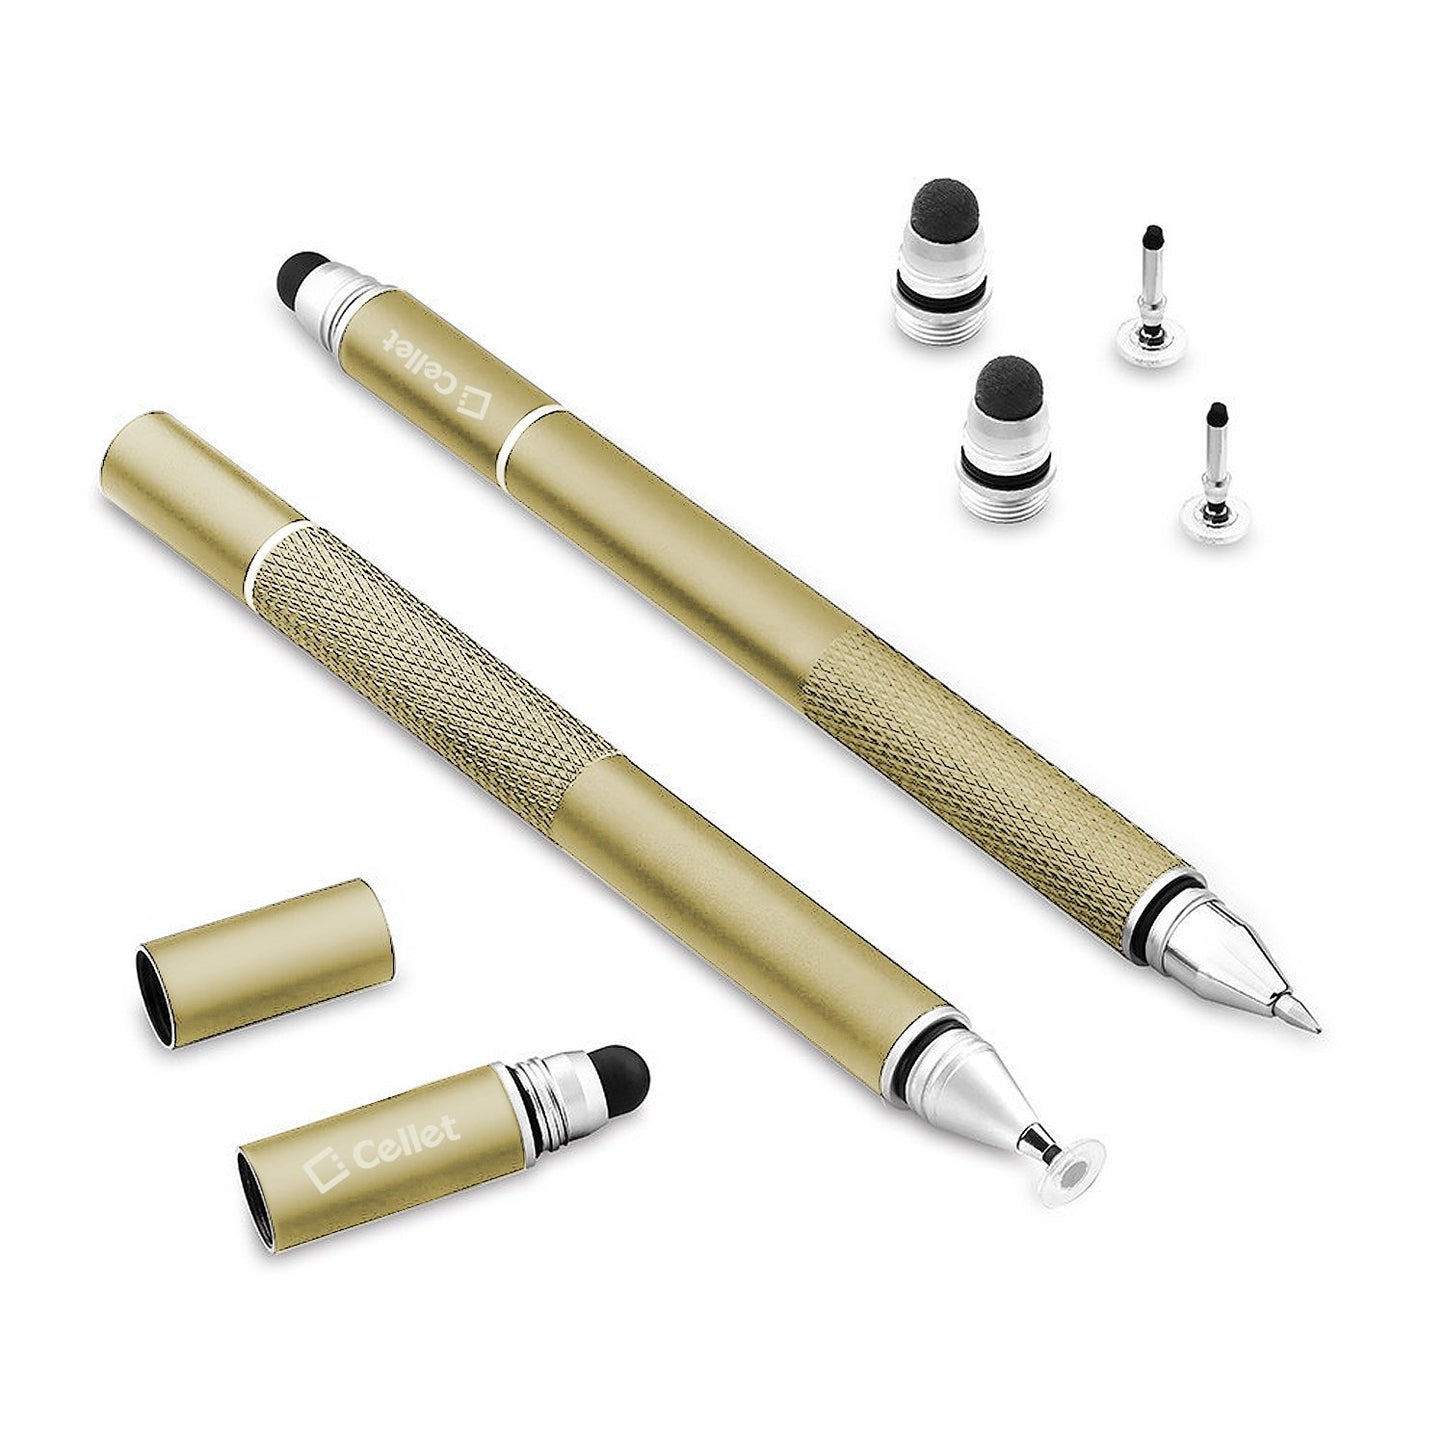 PENDISCGD - 3 in 1 Stylus Pen (Ballpoint Pen, Precision Clear Disc Pen, Capacitive Stylus Pen), 2 Stylus Pens with Replacement Tips - Gold